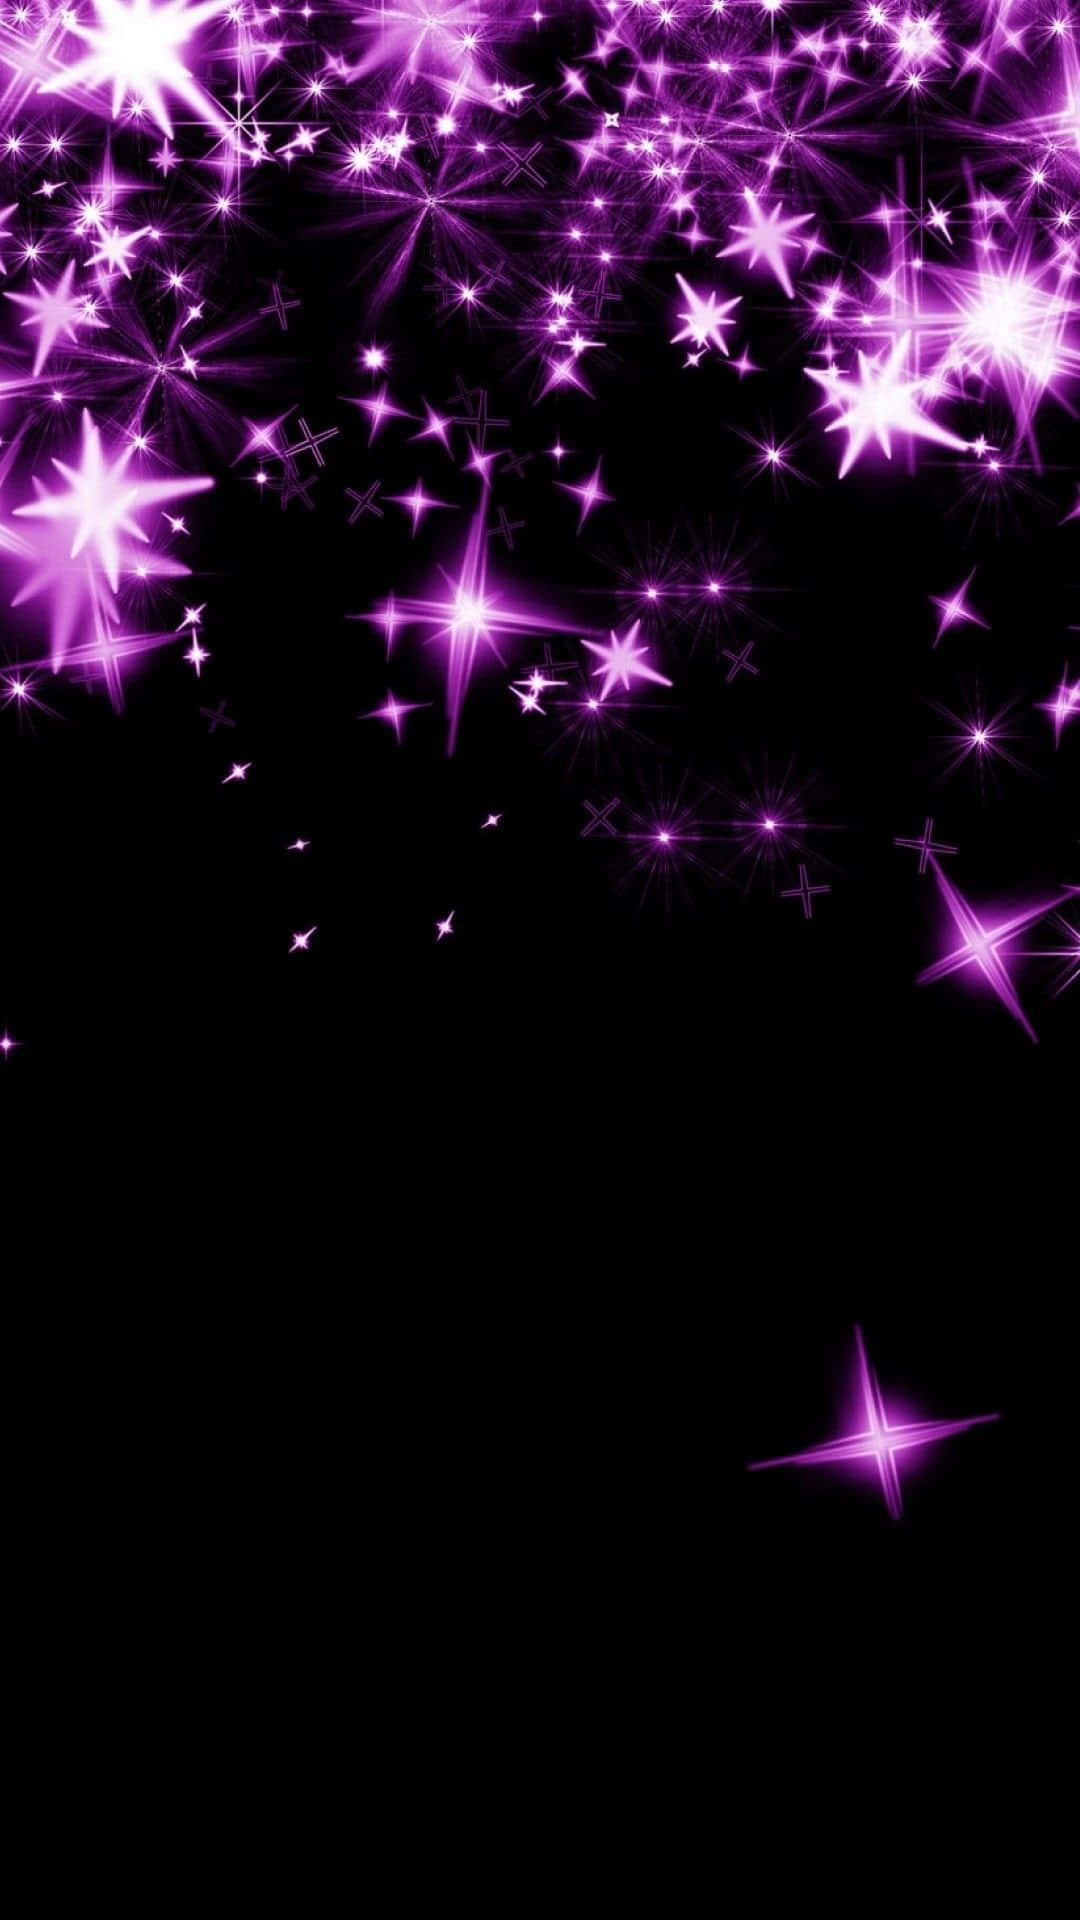 A mesmerizing pink galaxy with glowing stars Wallpaper